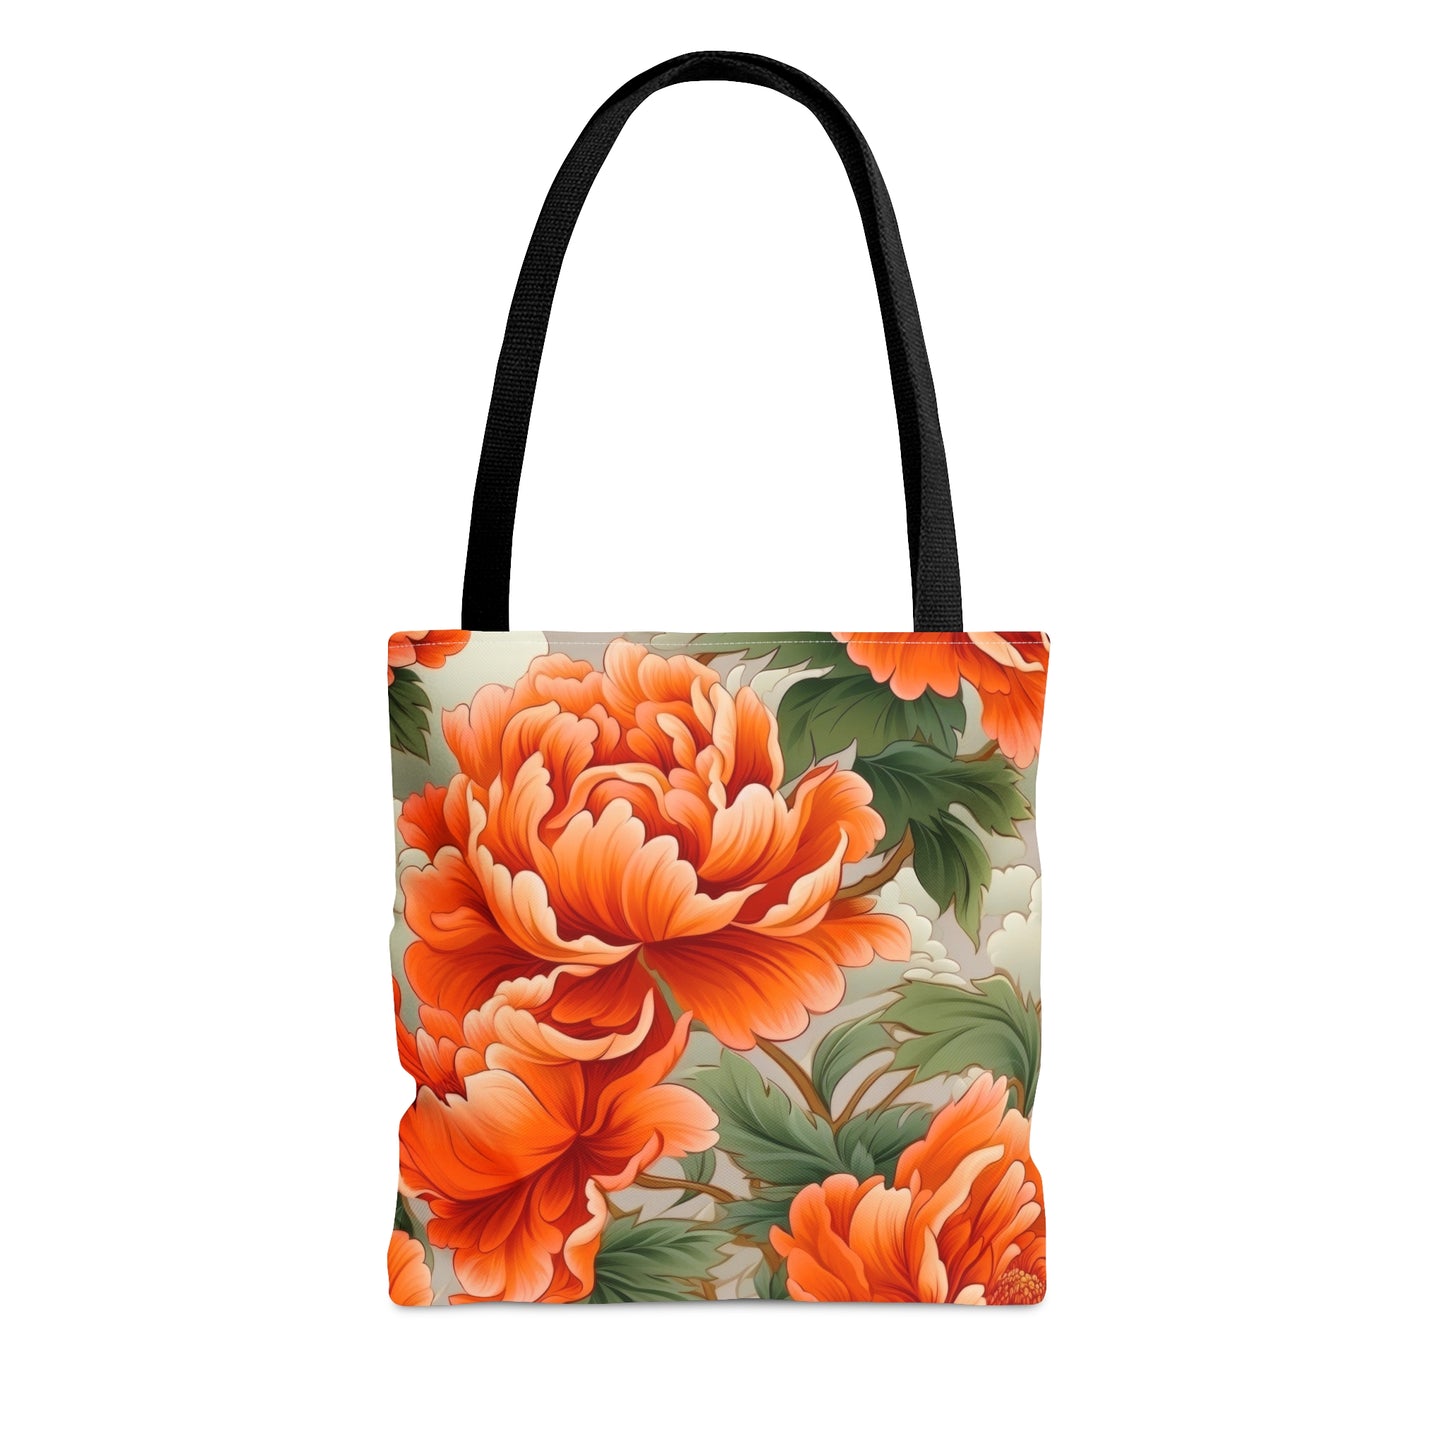 Retro Inspired Floral Tote Bag